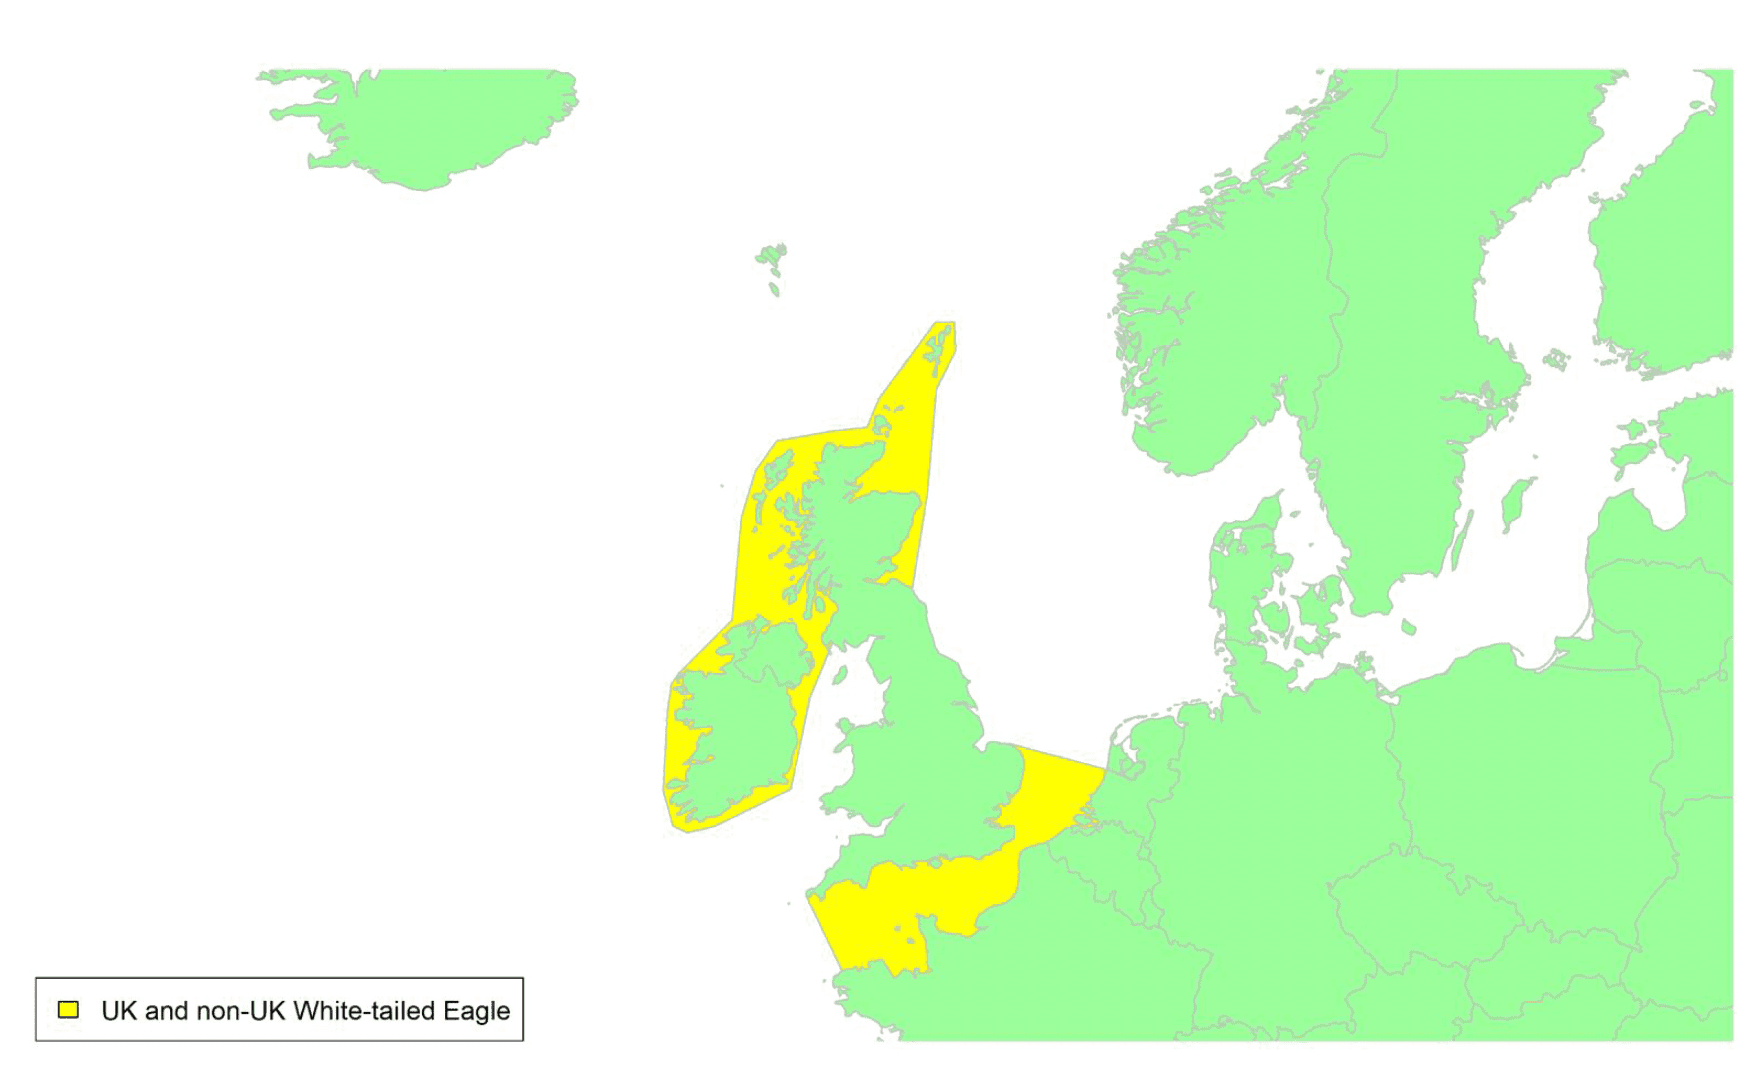 Map of North West Europe showing migratory routes and SPAs within the UK for White-tailed Eagle as described in the text below.